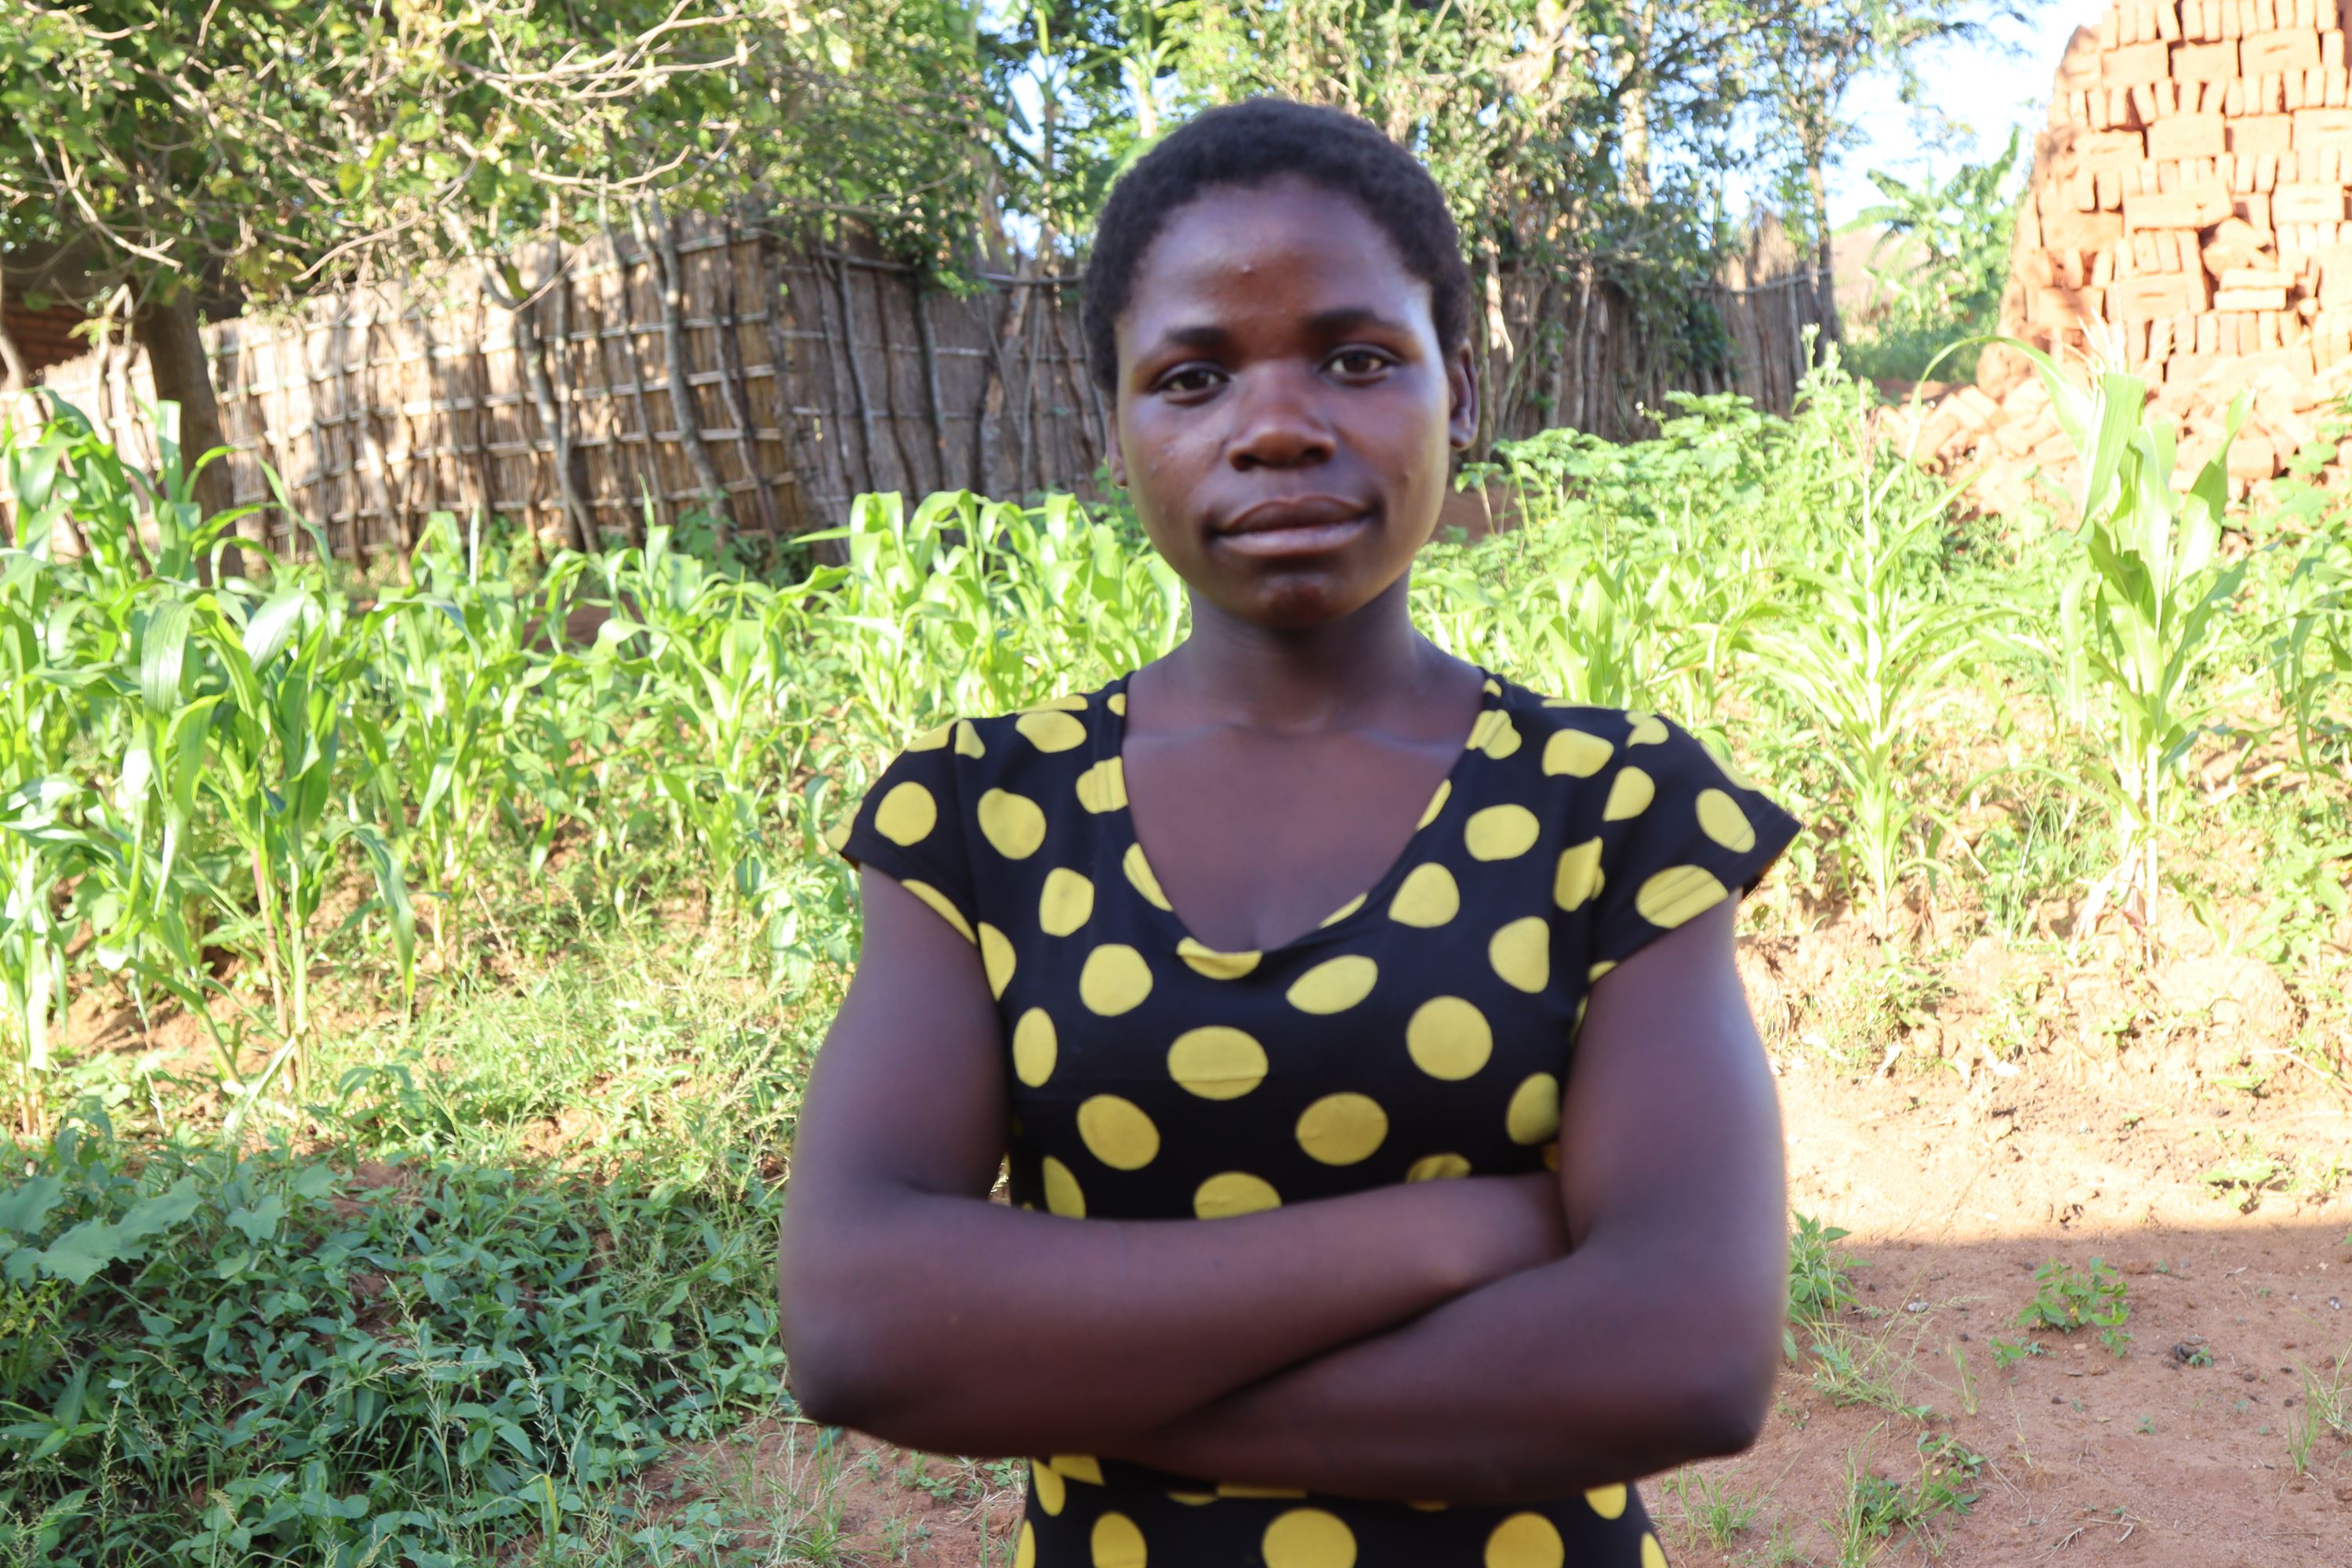 Girl from Malawi standing with her arms crossed in a field, looking at the camera